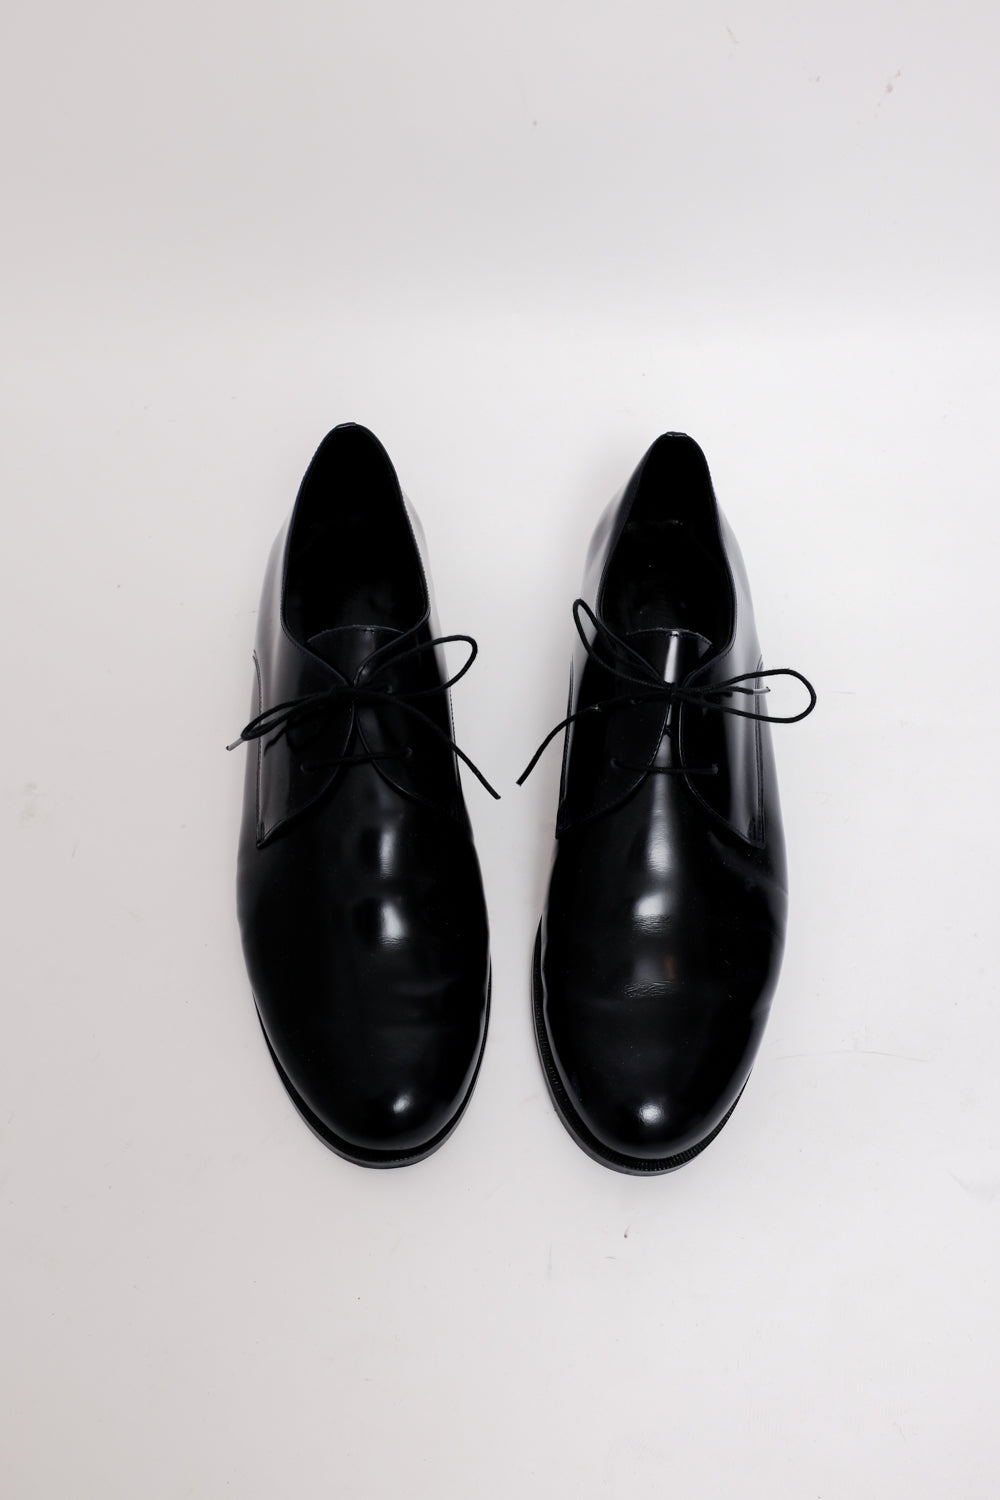 0048_LACE UP 41 LEATHER BROGUES SHOES